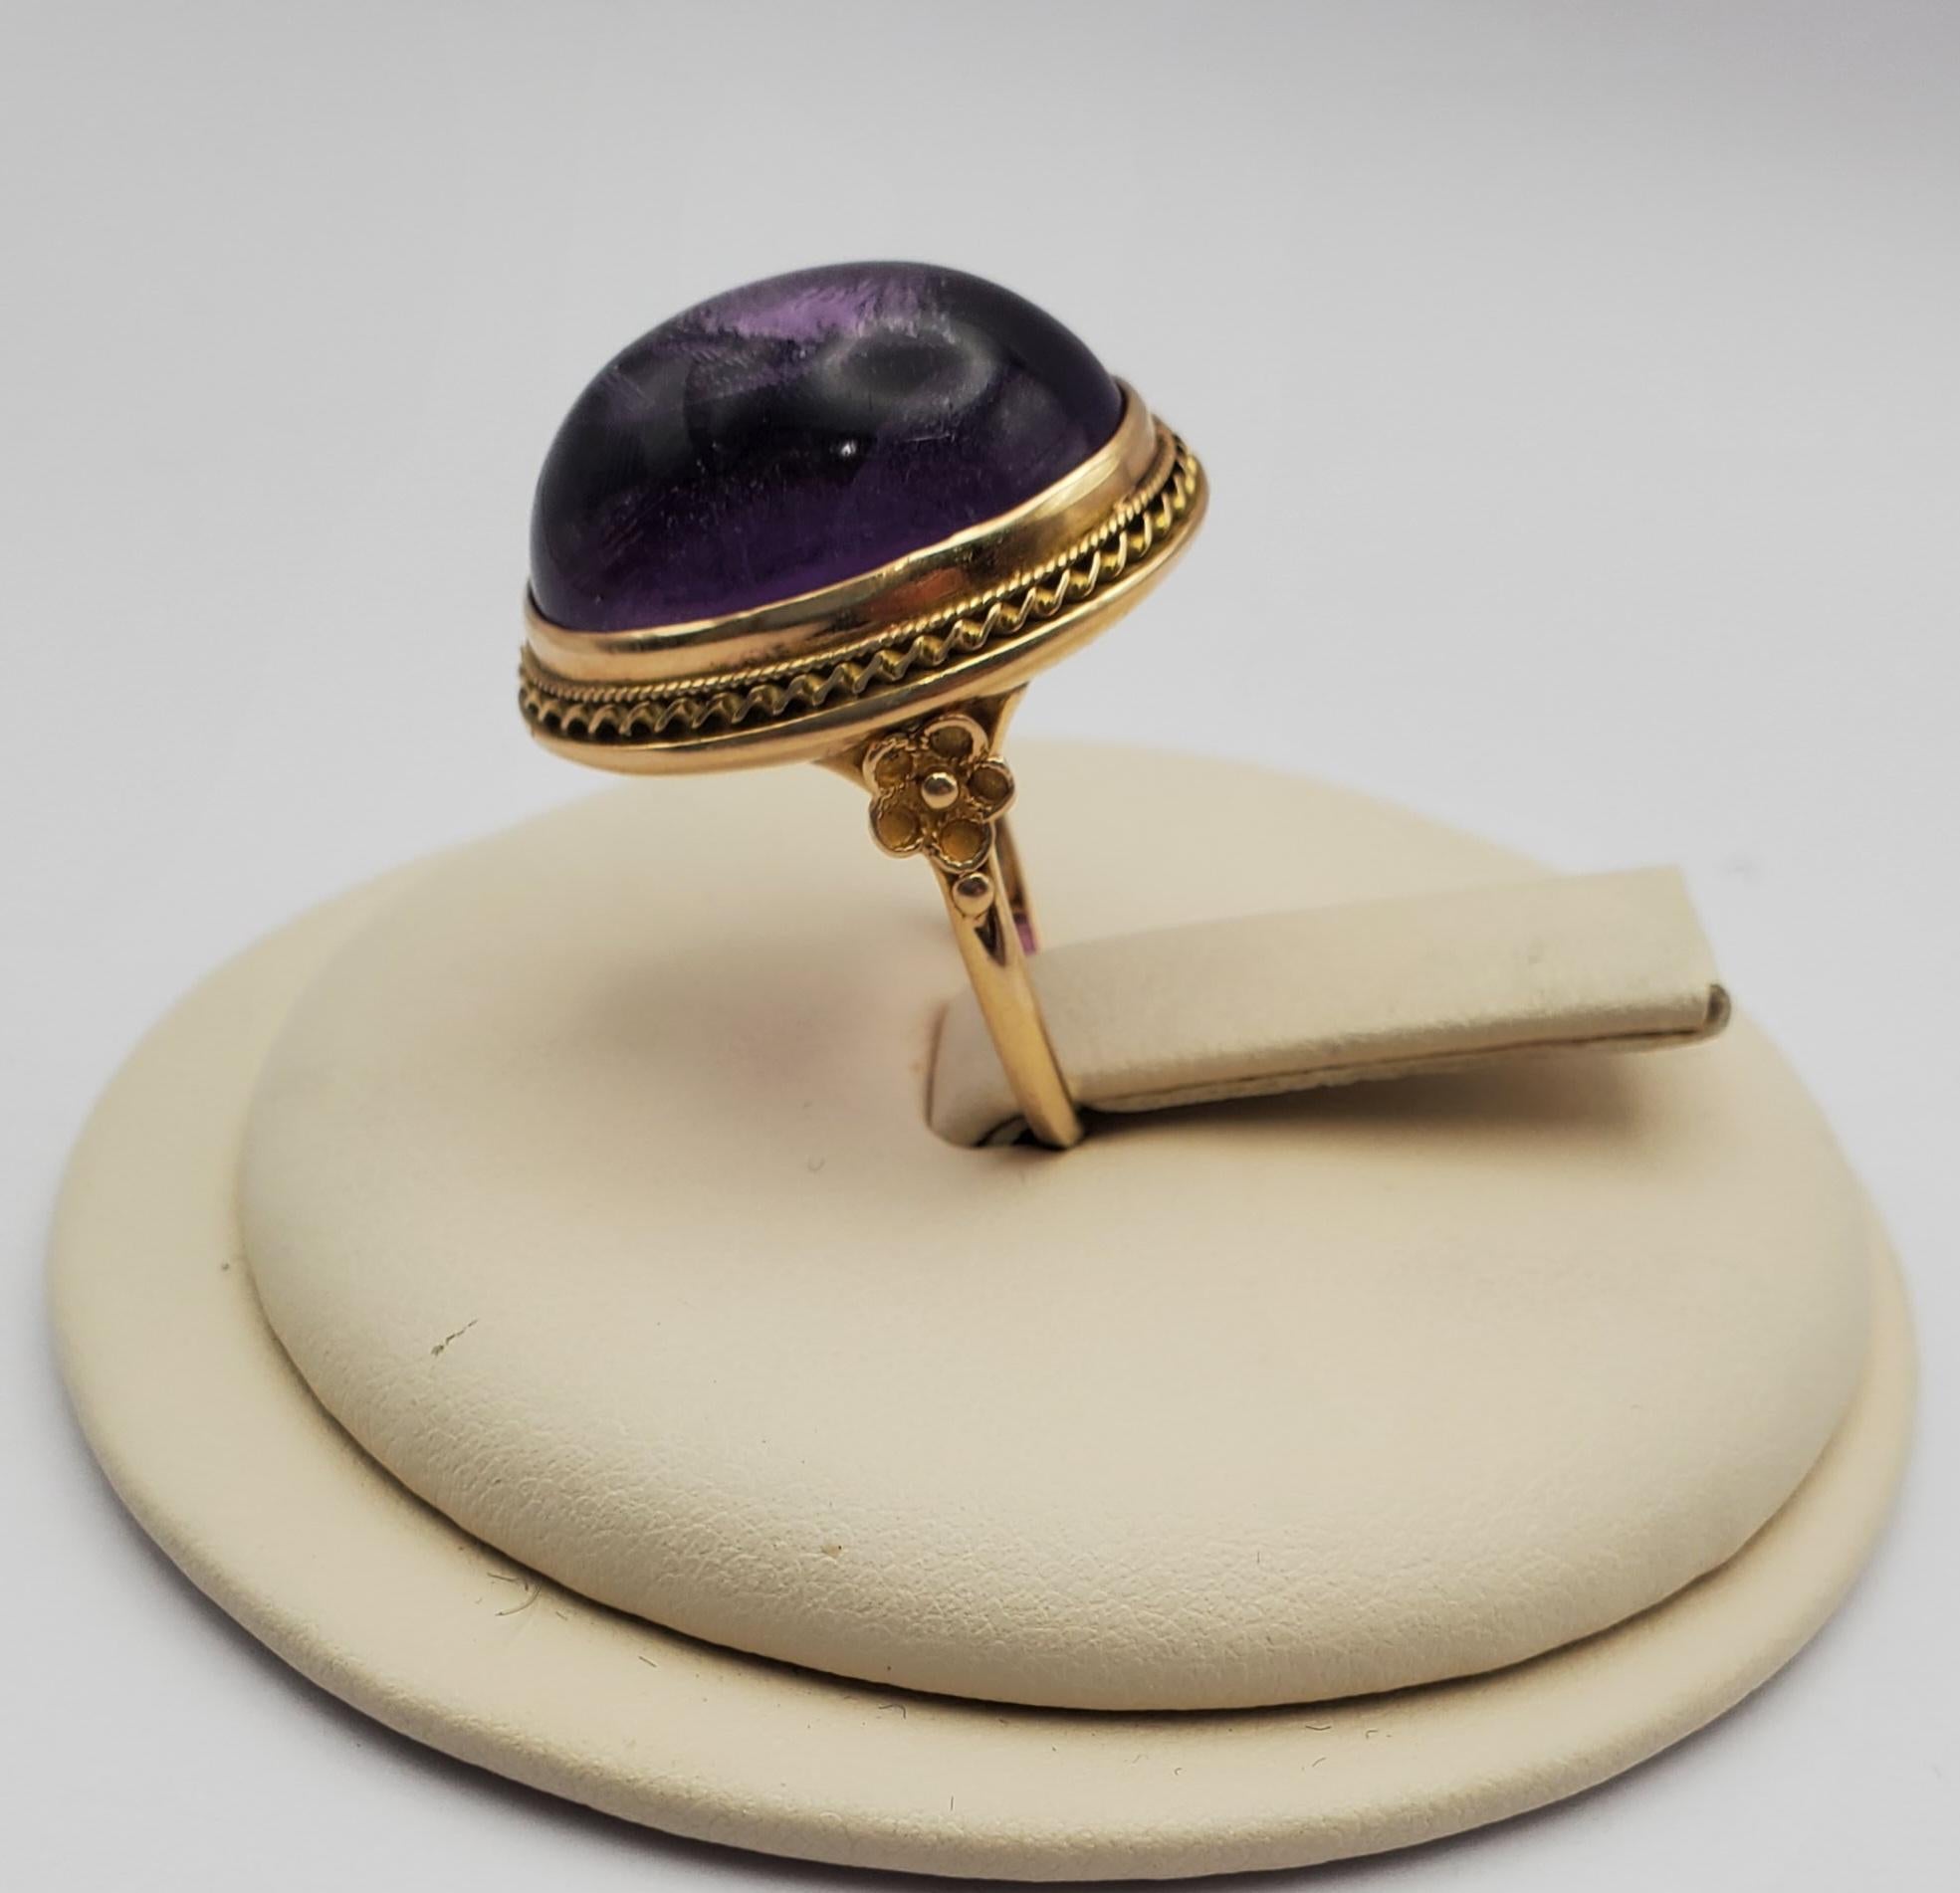 Gorgeous large 28.57ct Amethyst cabochon vintage ring. The richly colored stone is set in a bezel with carved and floral details. Its a statement piece perfect for purple lovers and people with an appreciation for bold jewelry looks. The ring is